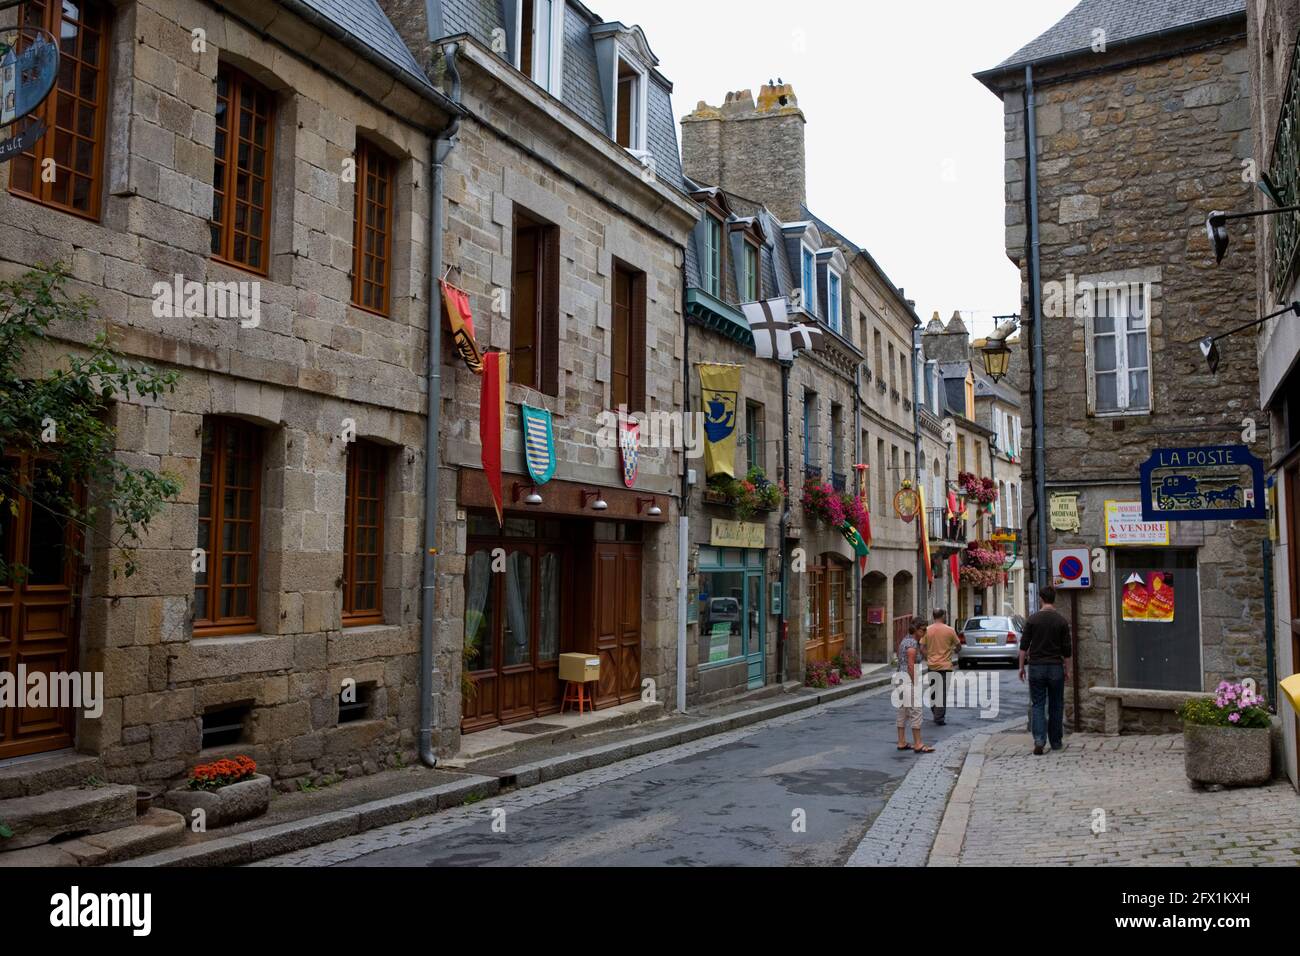 Rue du Temple, Moncontour, Côtes d'Armor, Brittany, France: entry to the main square.  MODEL RELEASED Stock Photo